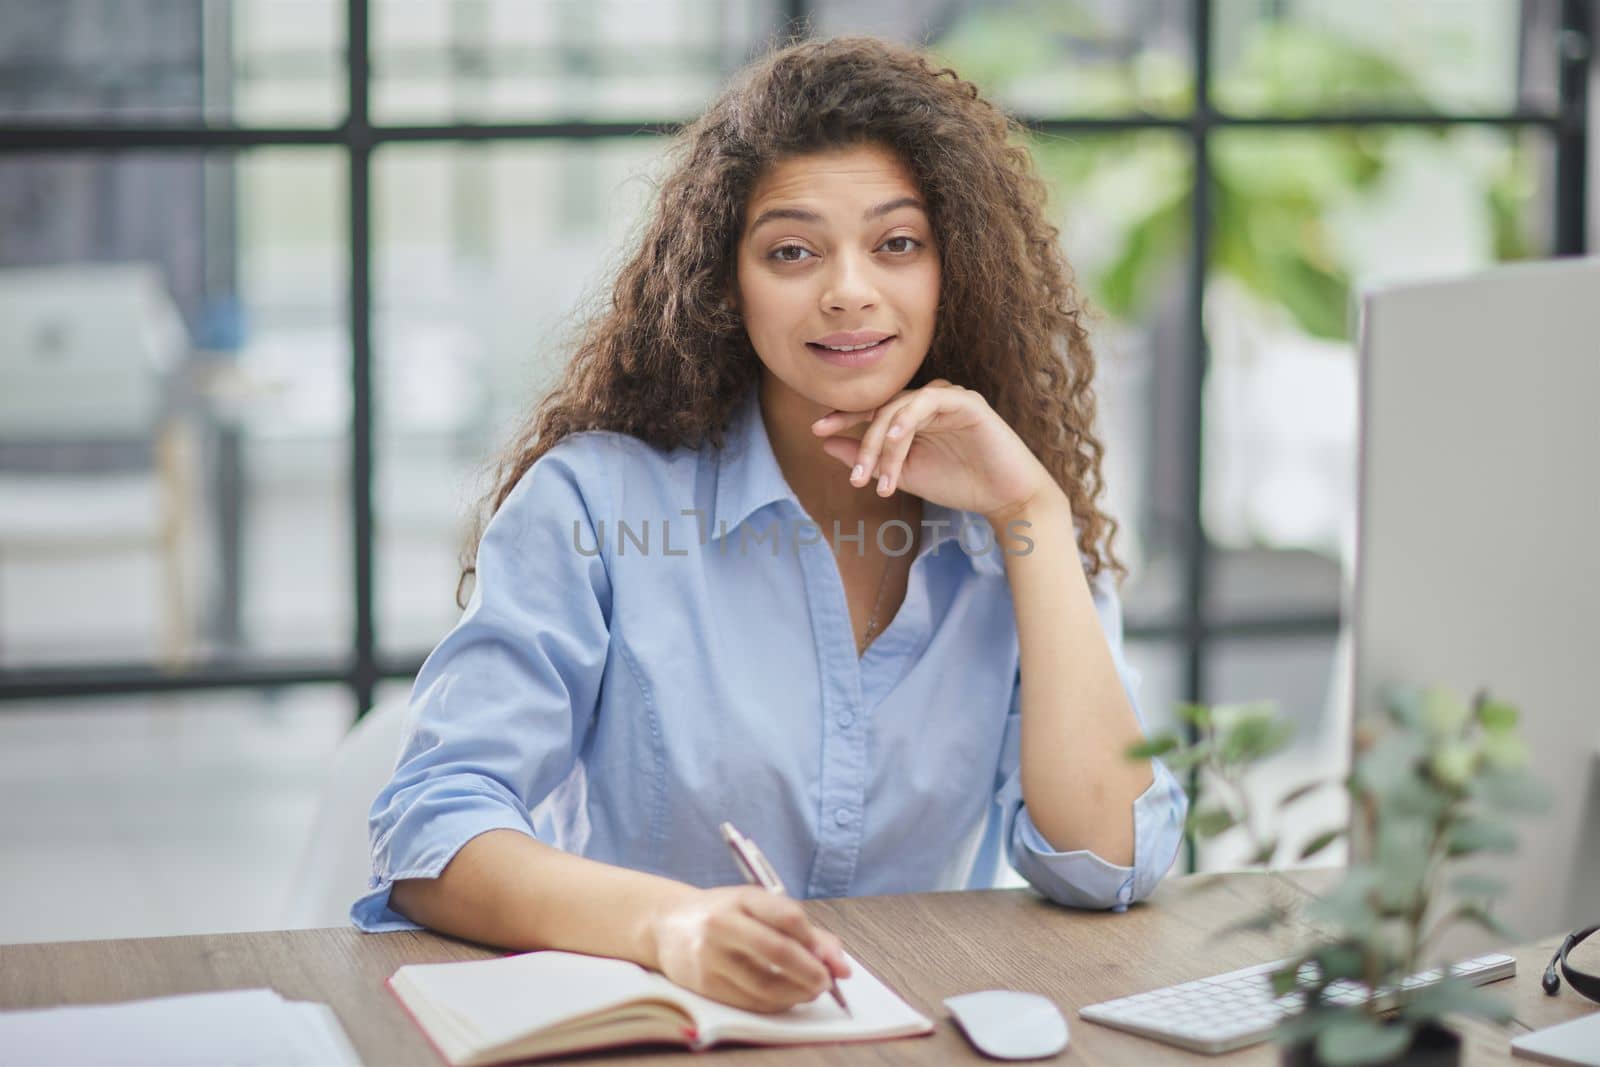 Business woman holding pens and papers making notes in documents on the table